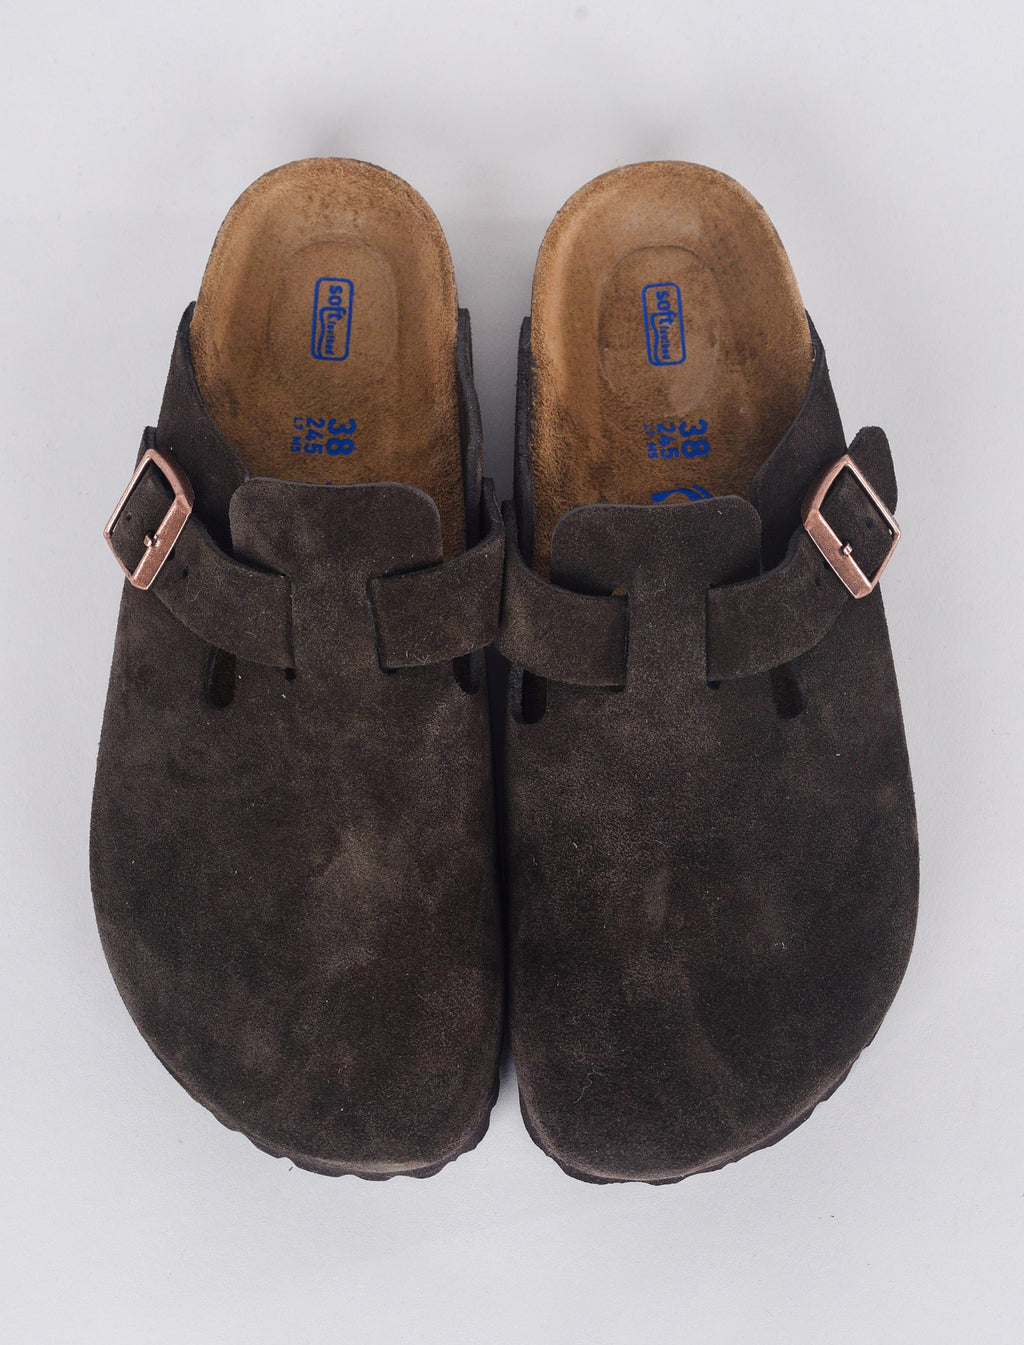 BIRKENSTOCK Boston Soft Footbed Suede Leather Clogs Shoes Brown- Womens- Size 43 M